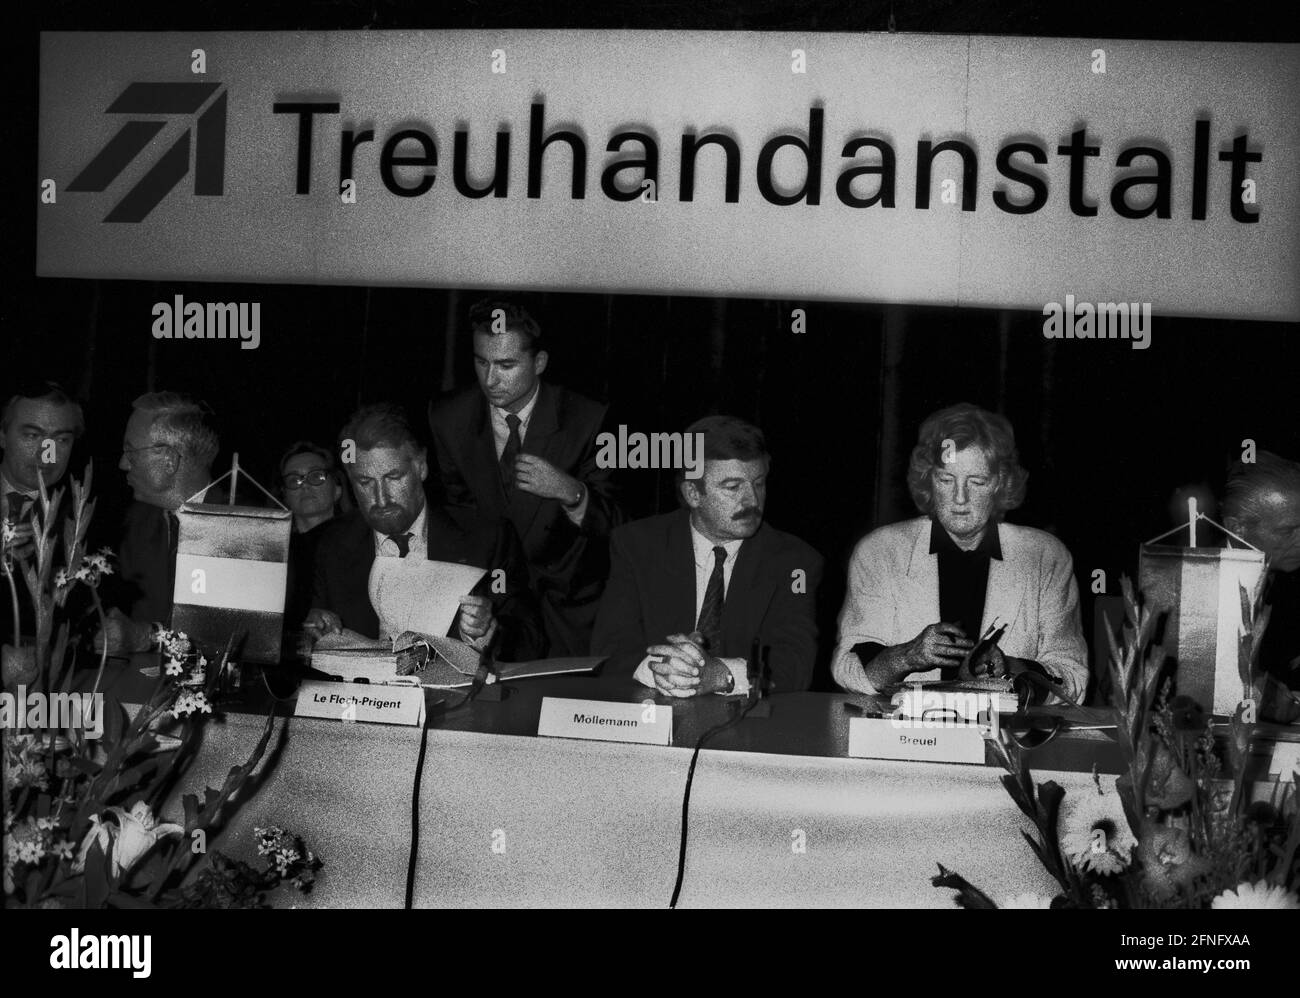 Berlin / Treuhand-Anstalt / ELF / 23.7.1992 Sale of the Leuna refinery to ELF-Aquitaine, signing of the contract in the Treuhand. Head of Treuhand Birgit Breuel, Federal Minister of Economics Juergen Moellemann, ELF head Le Floch Prigent, members of the French delegation named Puechel Standing behind: unknown // GDR / Industry / Privatisation / Donations / Bribery / Corruption / [automated translation] Stock Photo